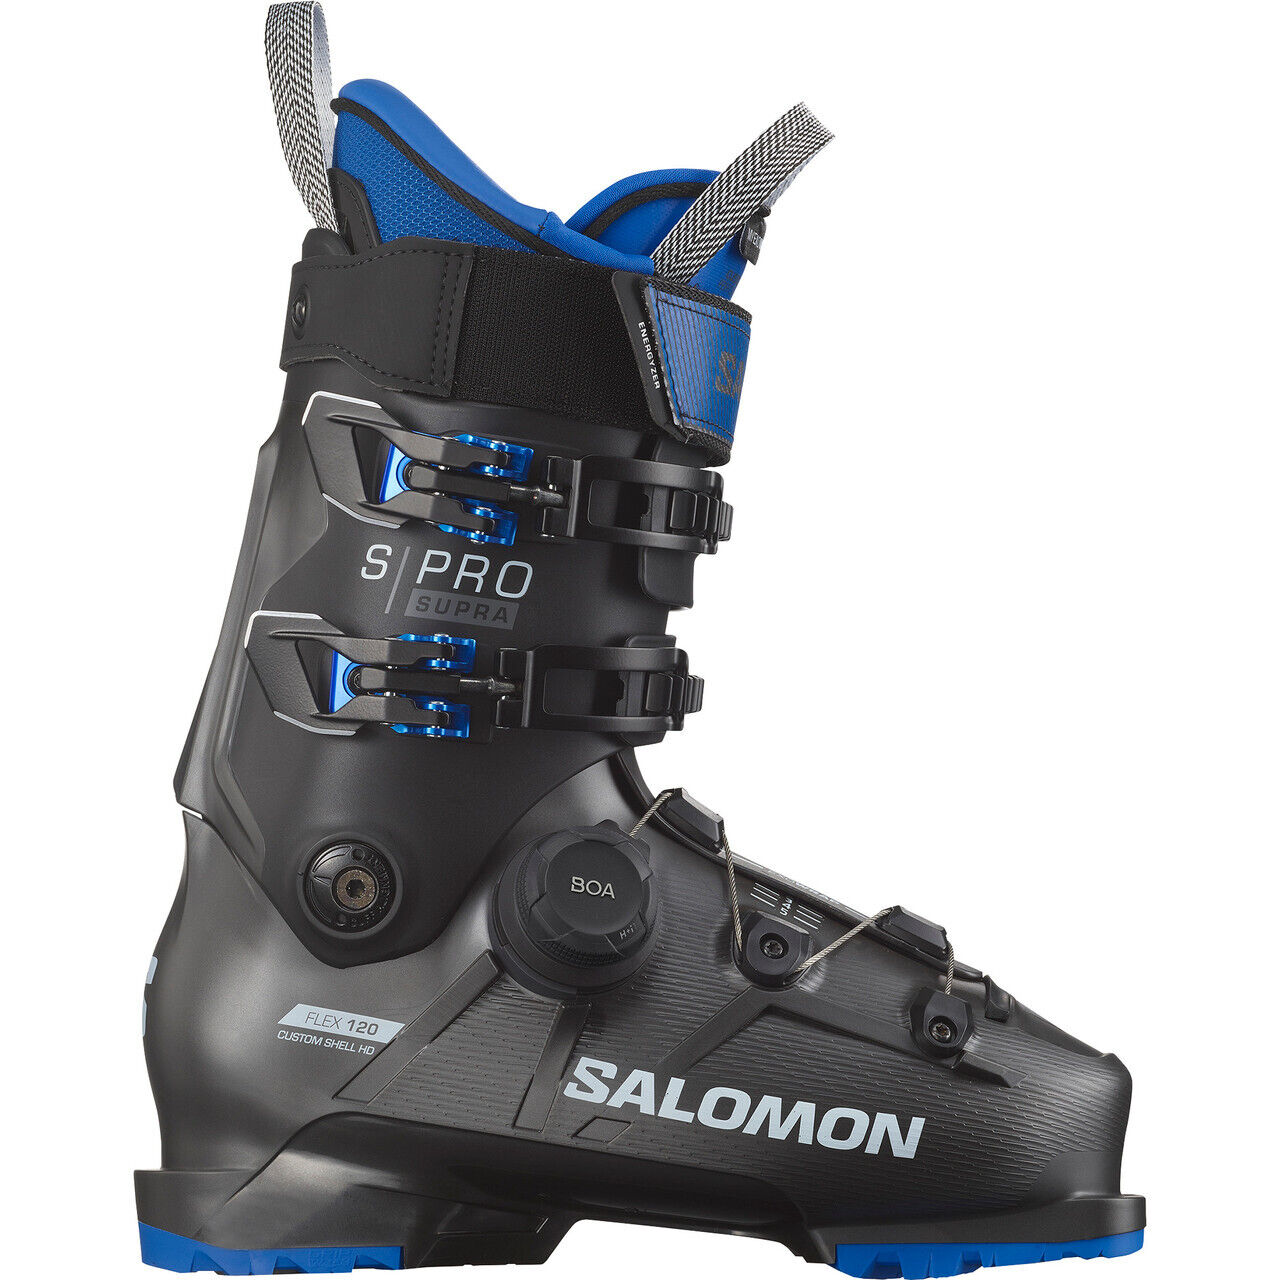 Engineered to advance foothold and performance by challenging traditional boot constructions Salomon's Supra BOA 120 outline a new standard of perfect fit. Our ExoWrap Construction combined with the BOA Fit System provides a micro-adjustable precision fit and a targeted wrap around the foot that can easily be adjusted throughout the day